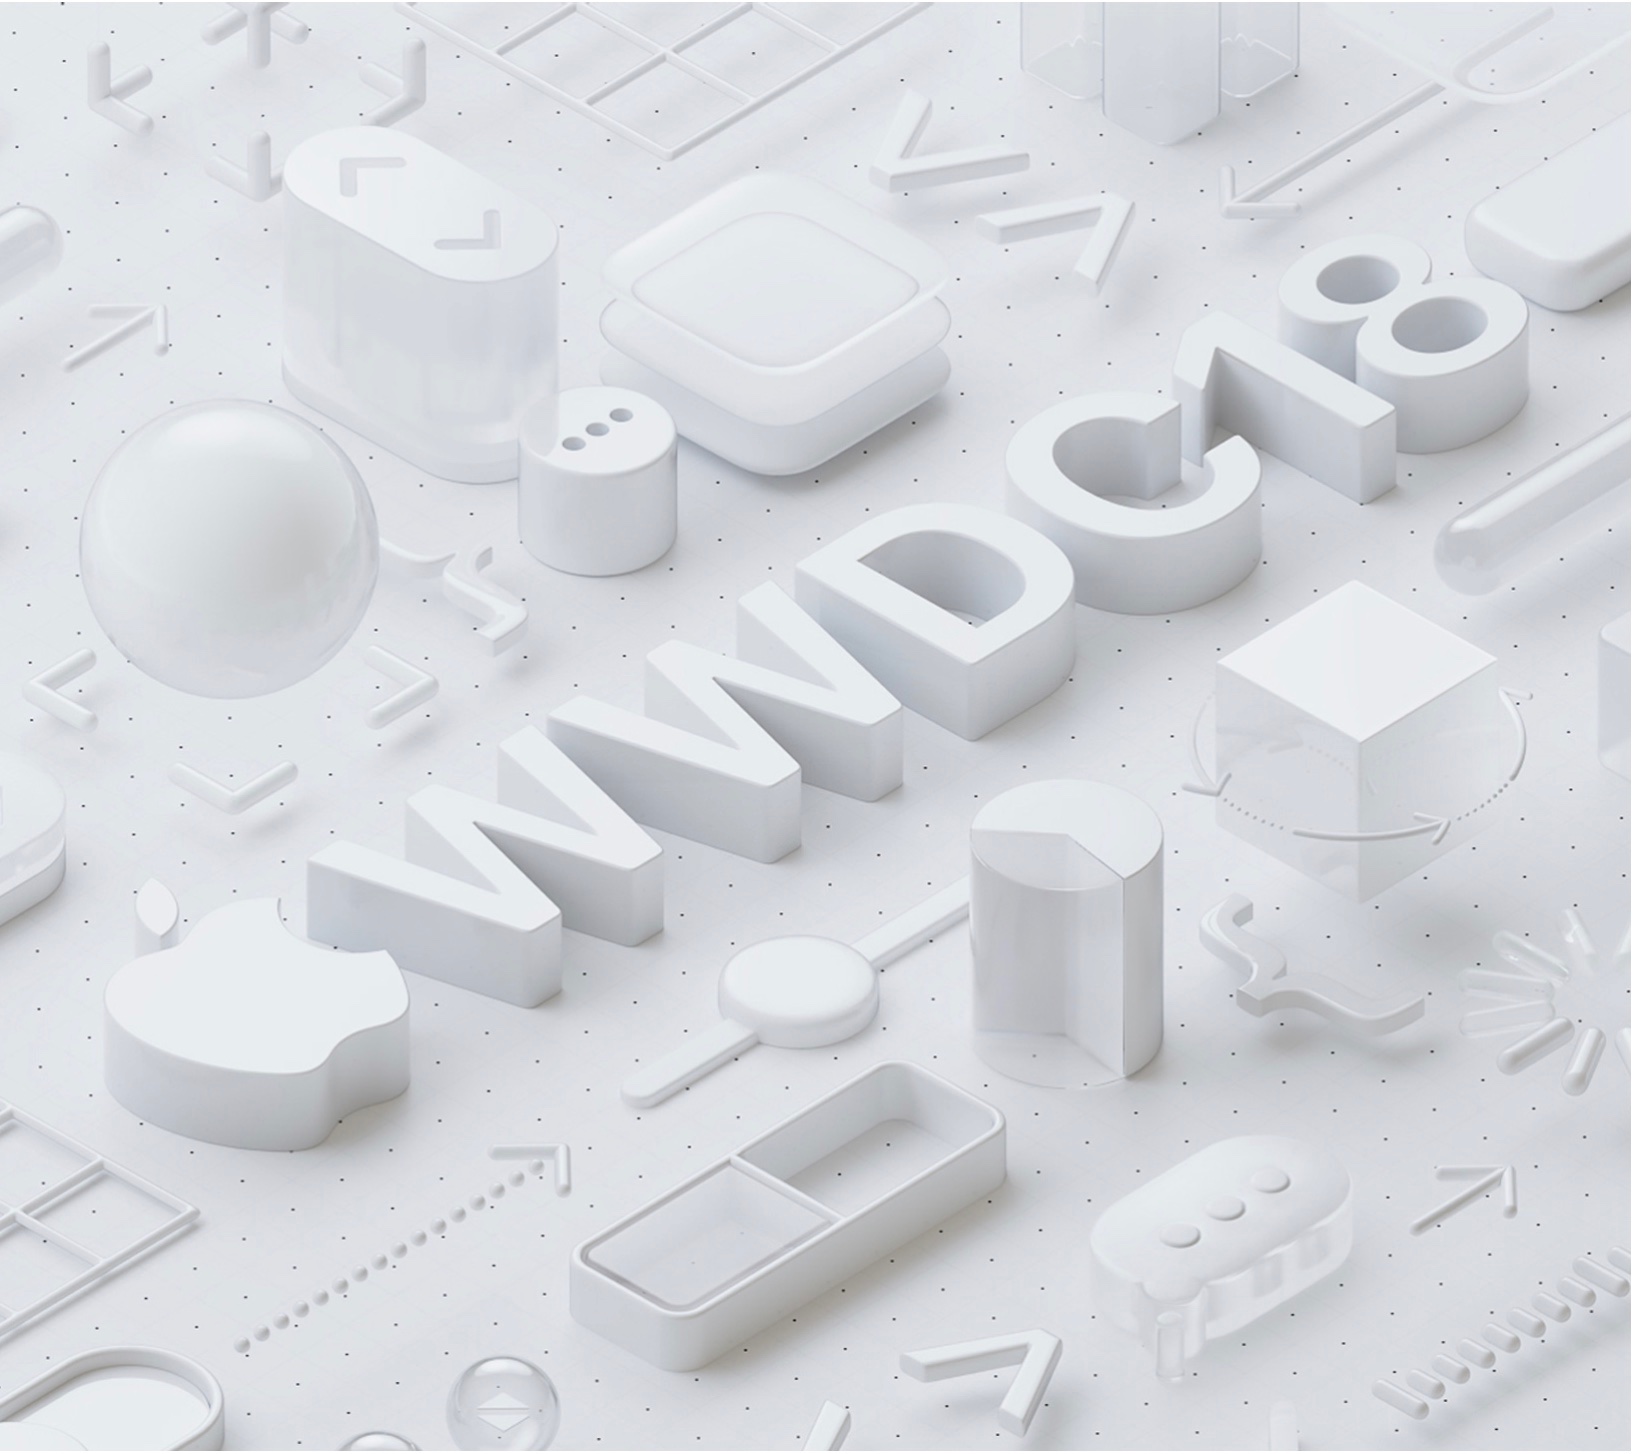 Apple sends out press invites to WWDC keynote